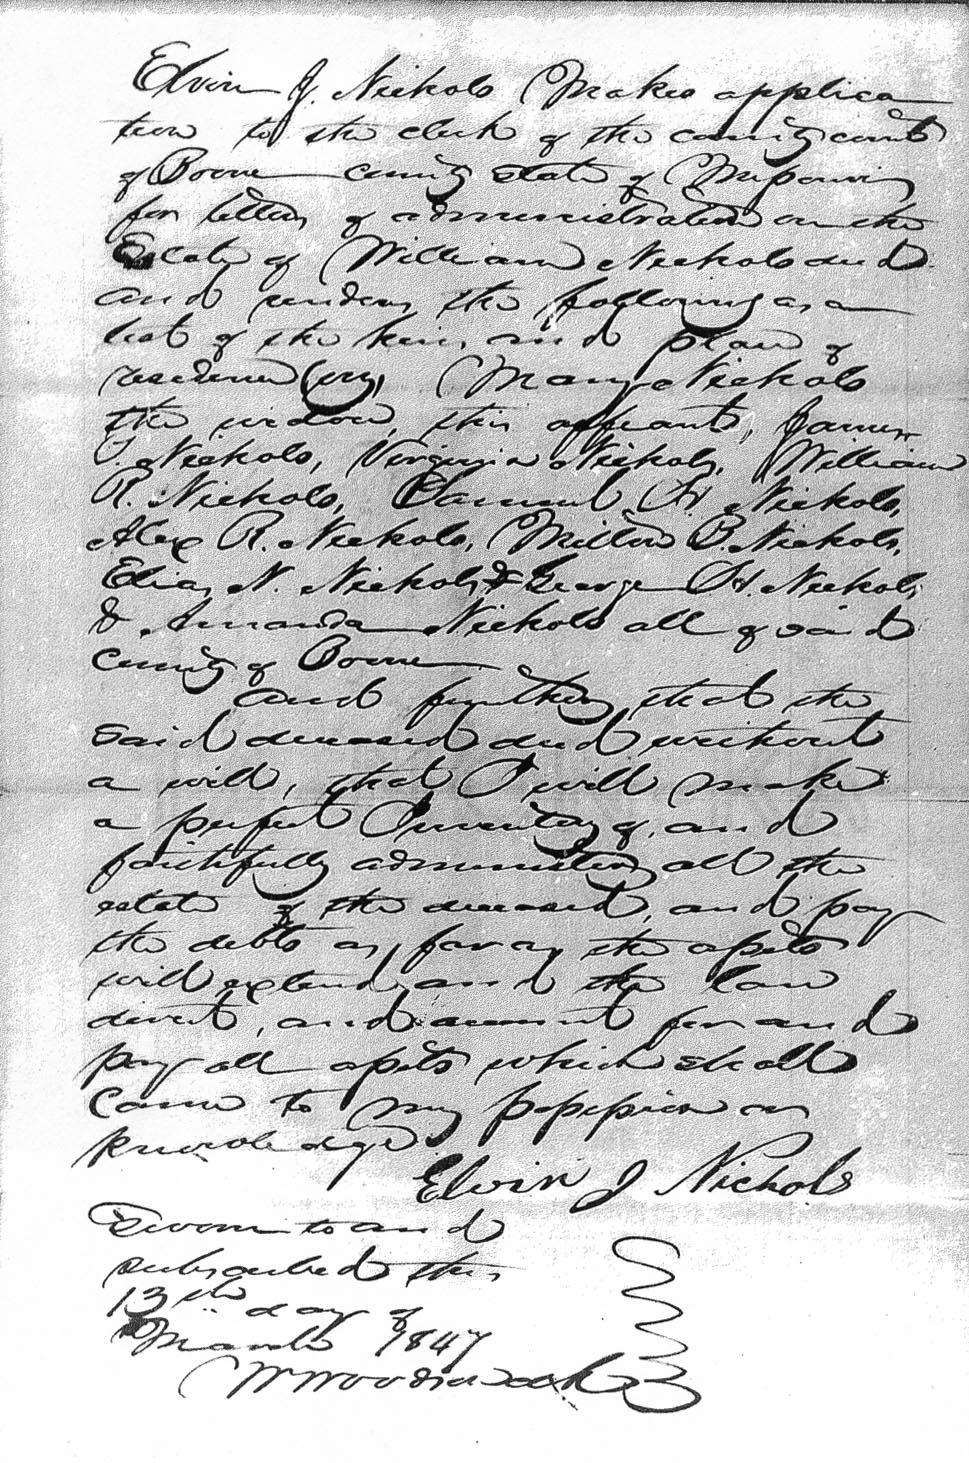 4. William F. Nichols died at the age of fifty two, at which time his son, Elvin, filed this application to the Boone Co.